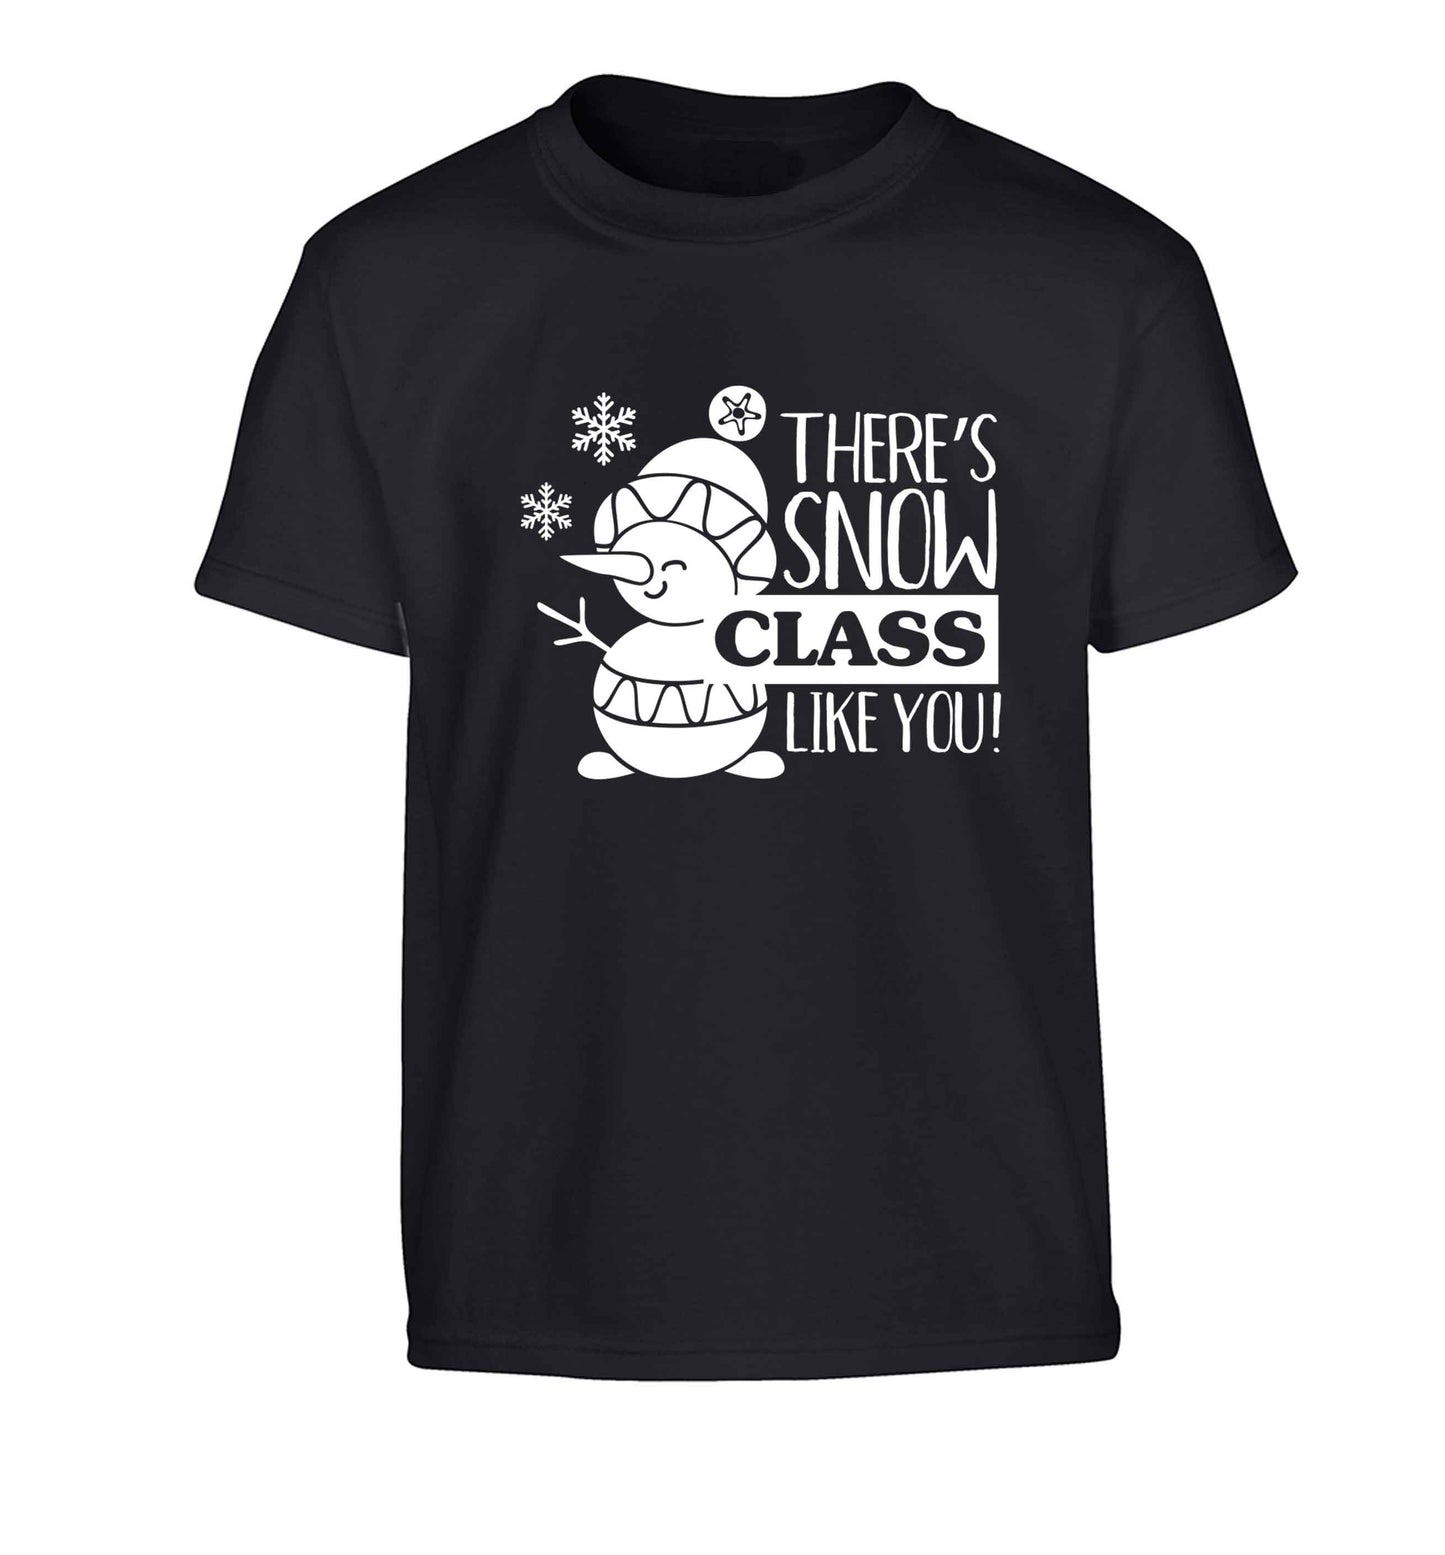 There's snow class like you Children's black Tshirt 12-13 Years